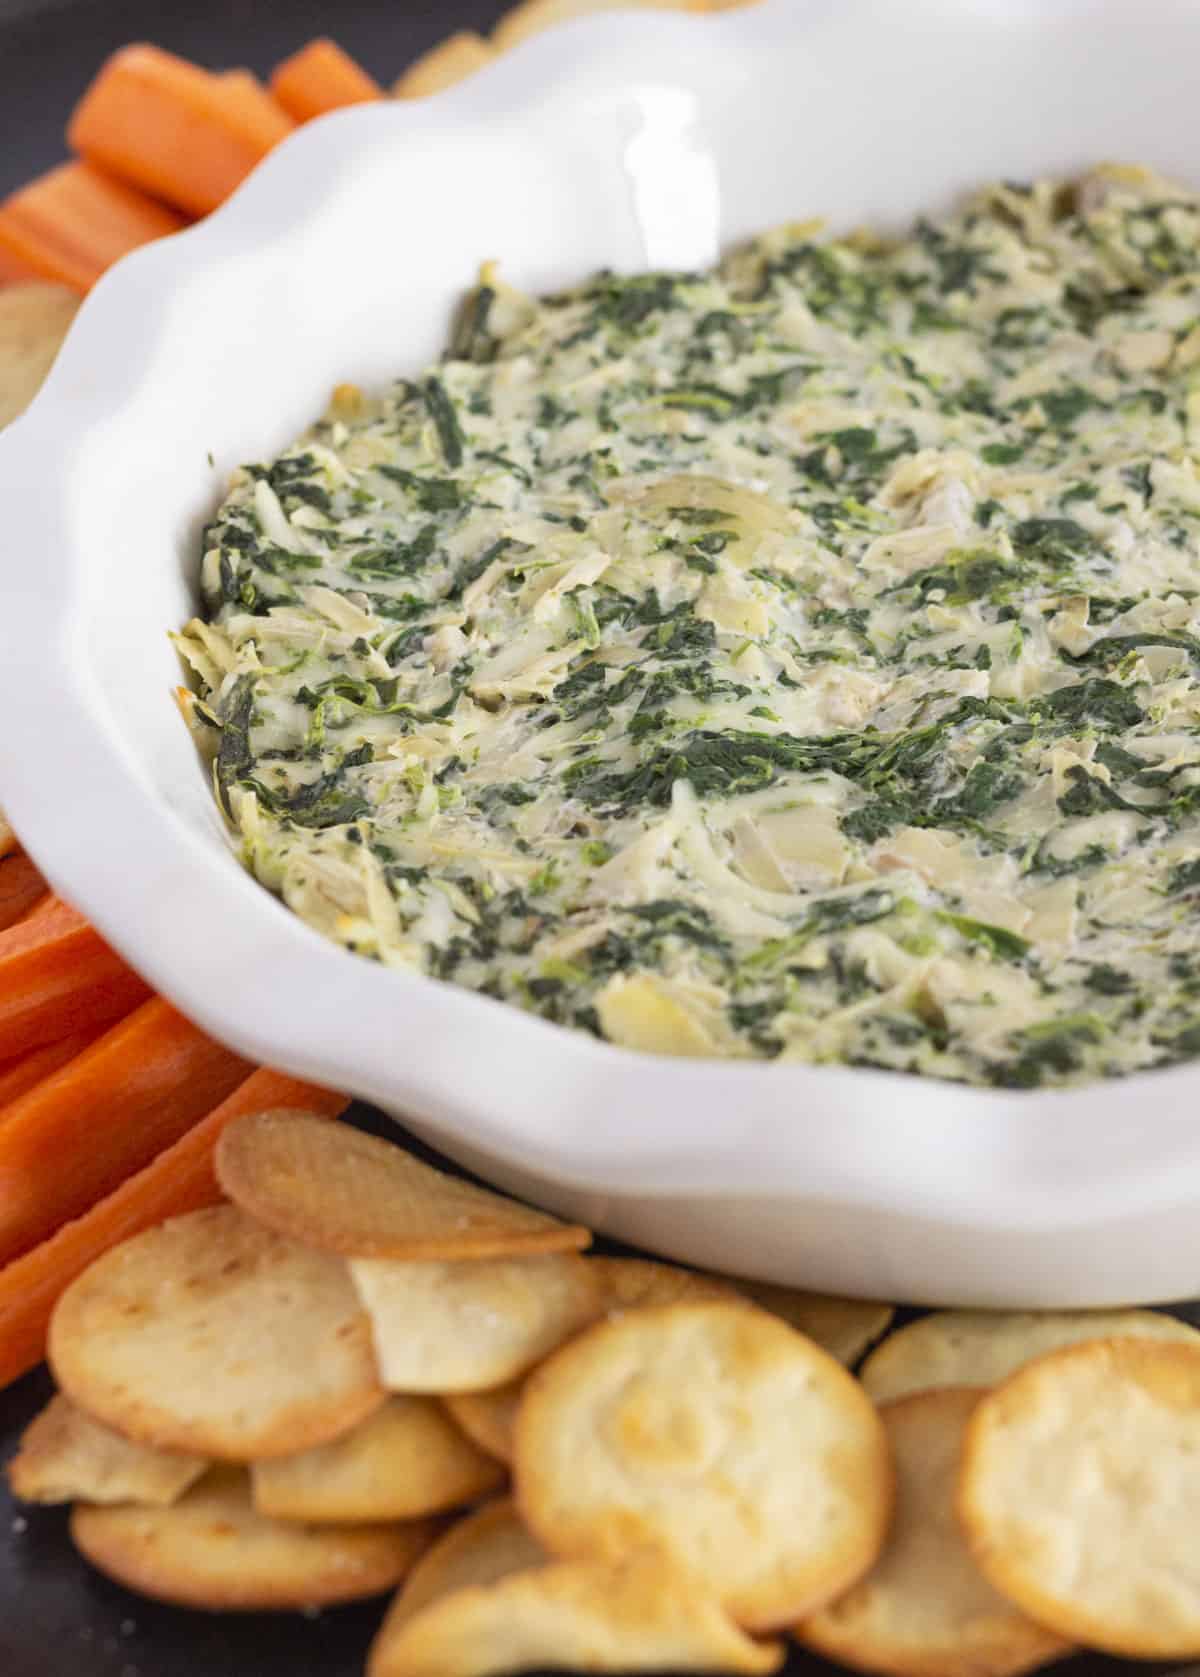 Spinach and artichoke dip served with crackers and carrots.